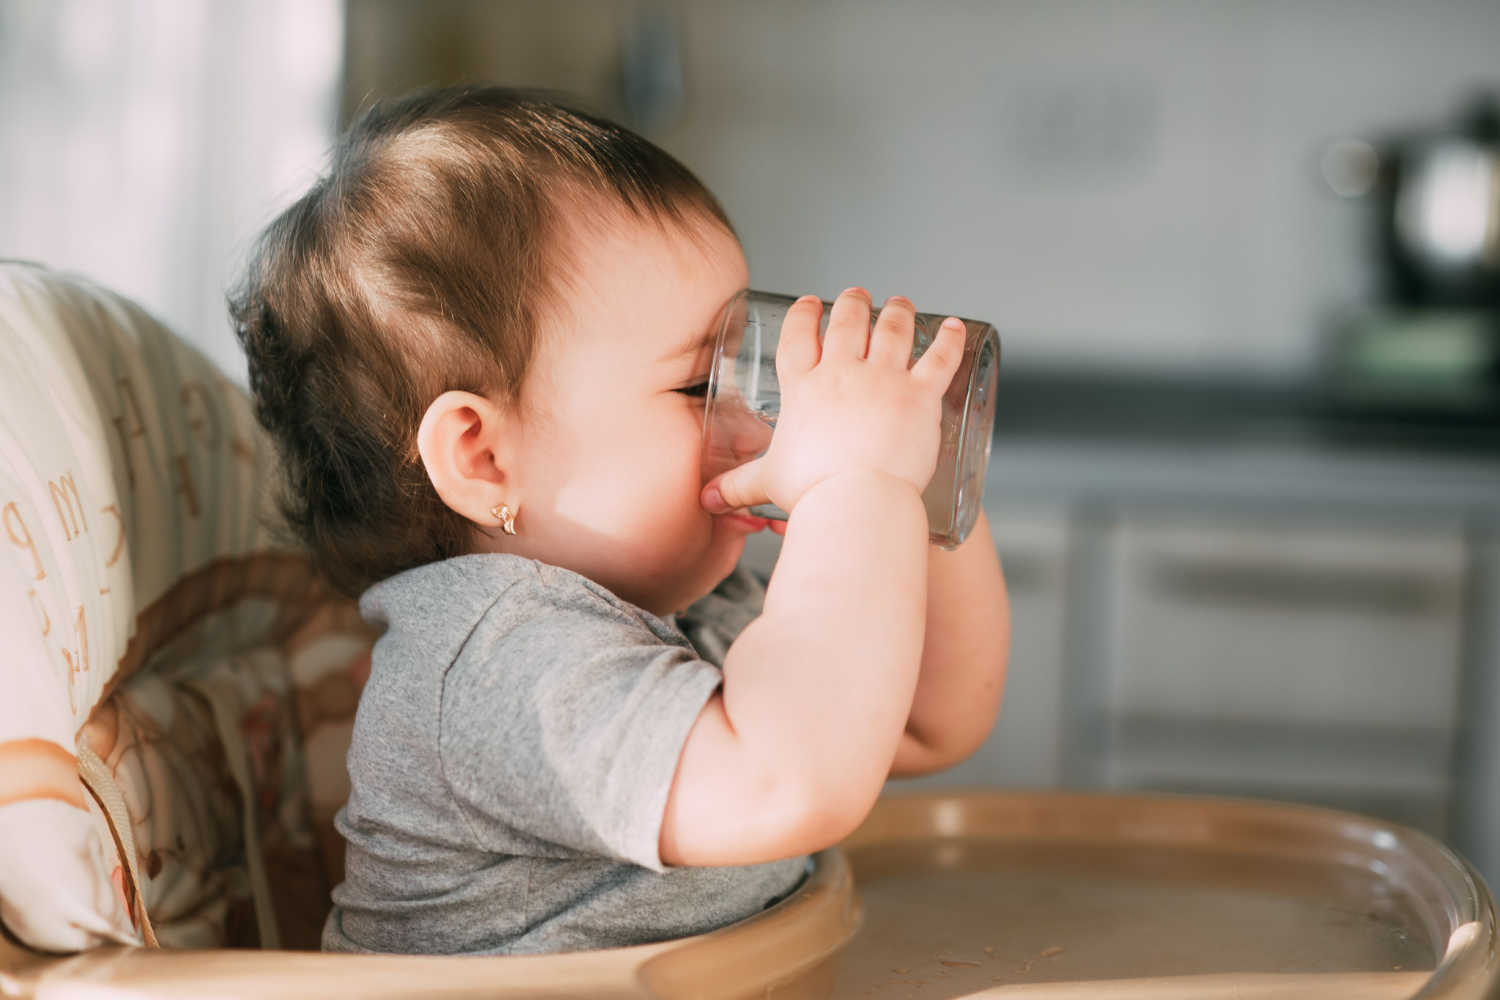 Tips to Help a Baby Use an Open Cup